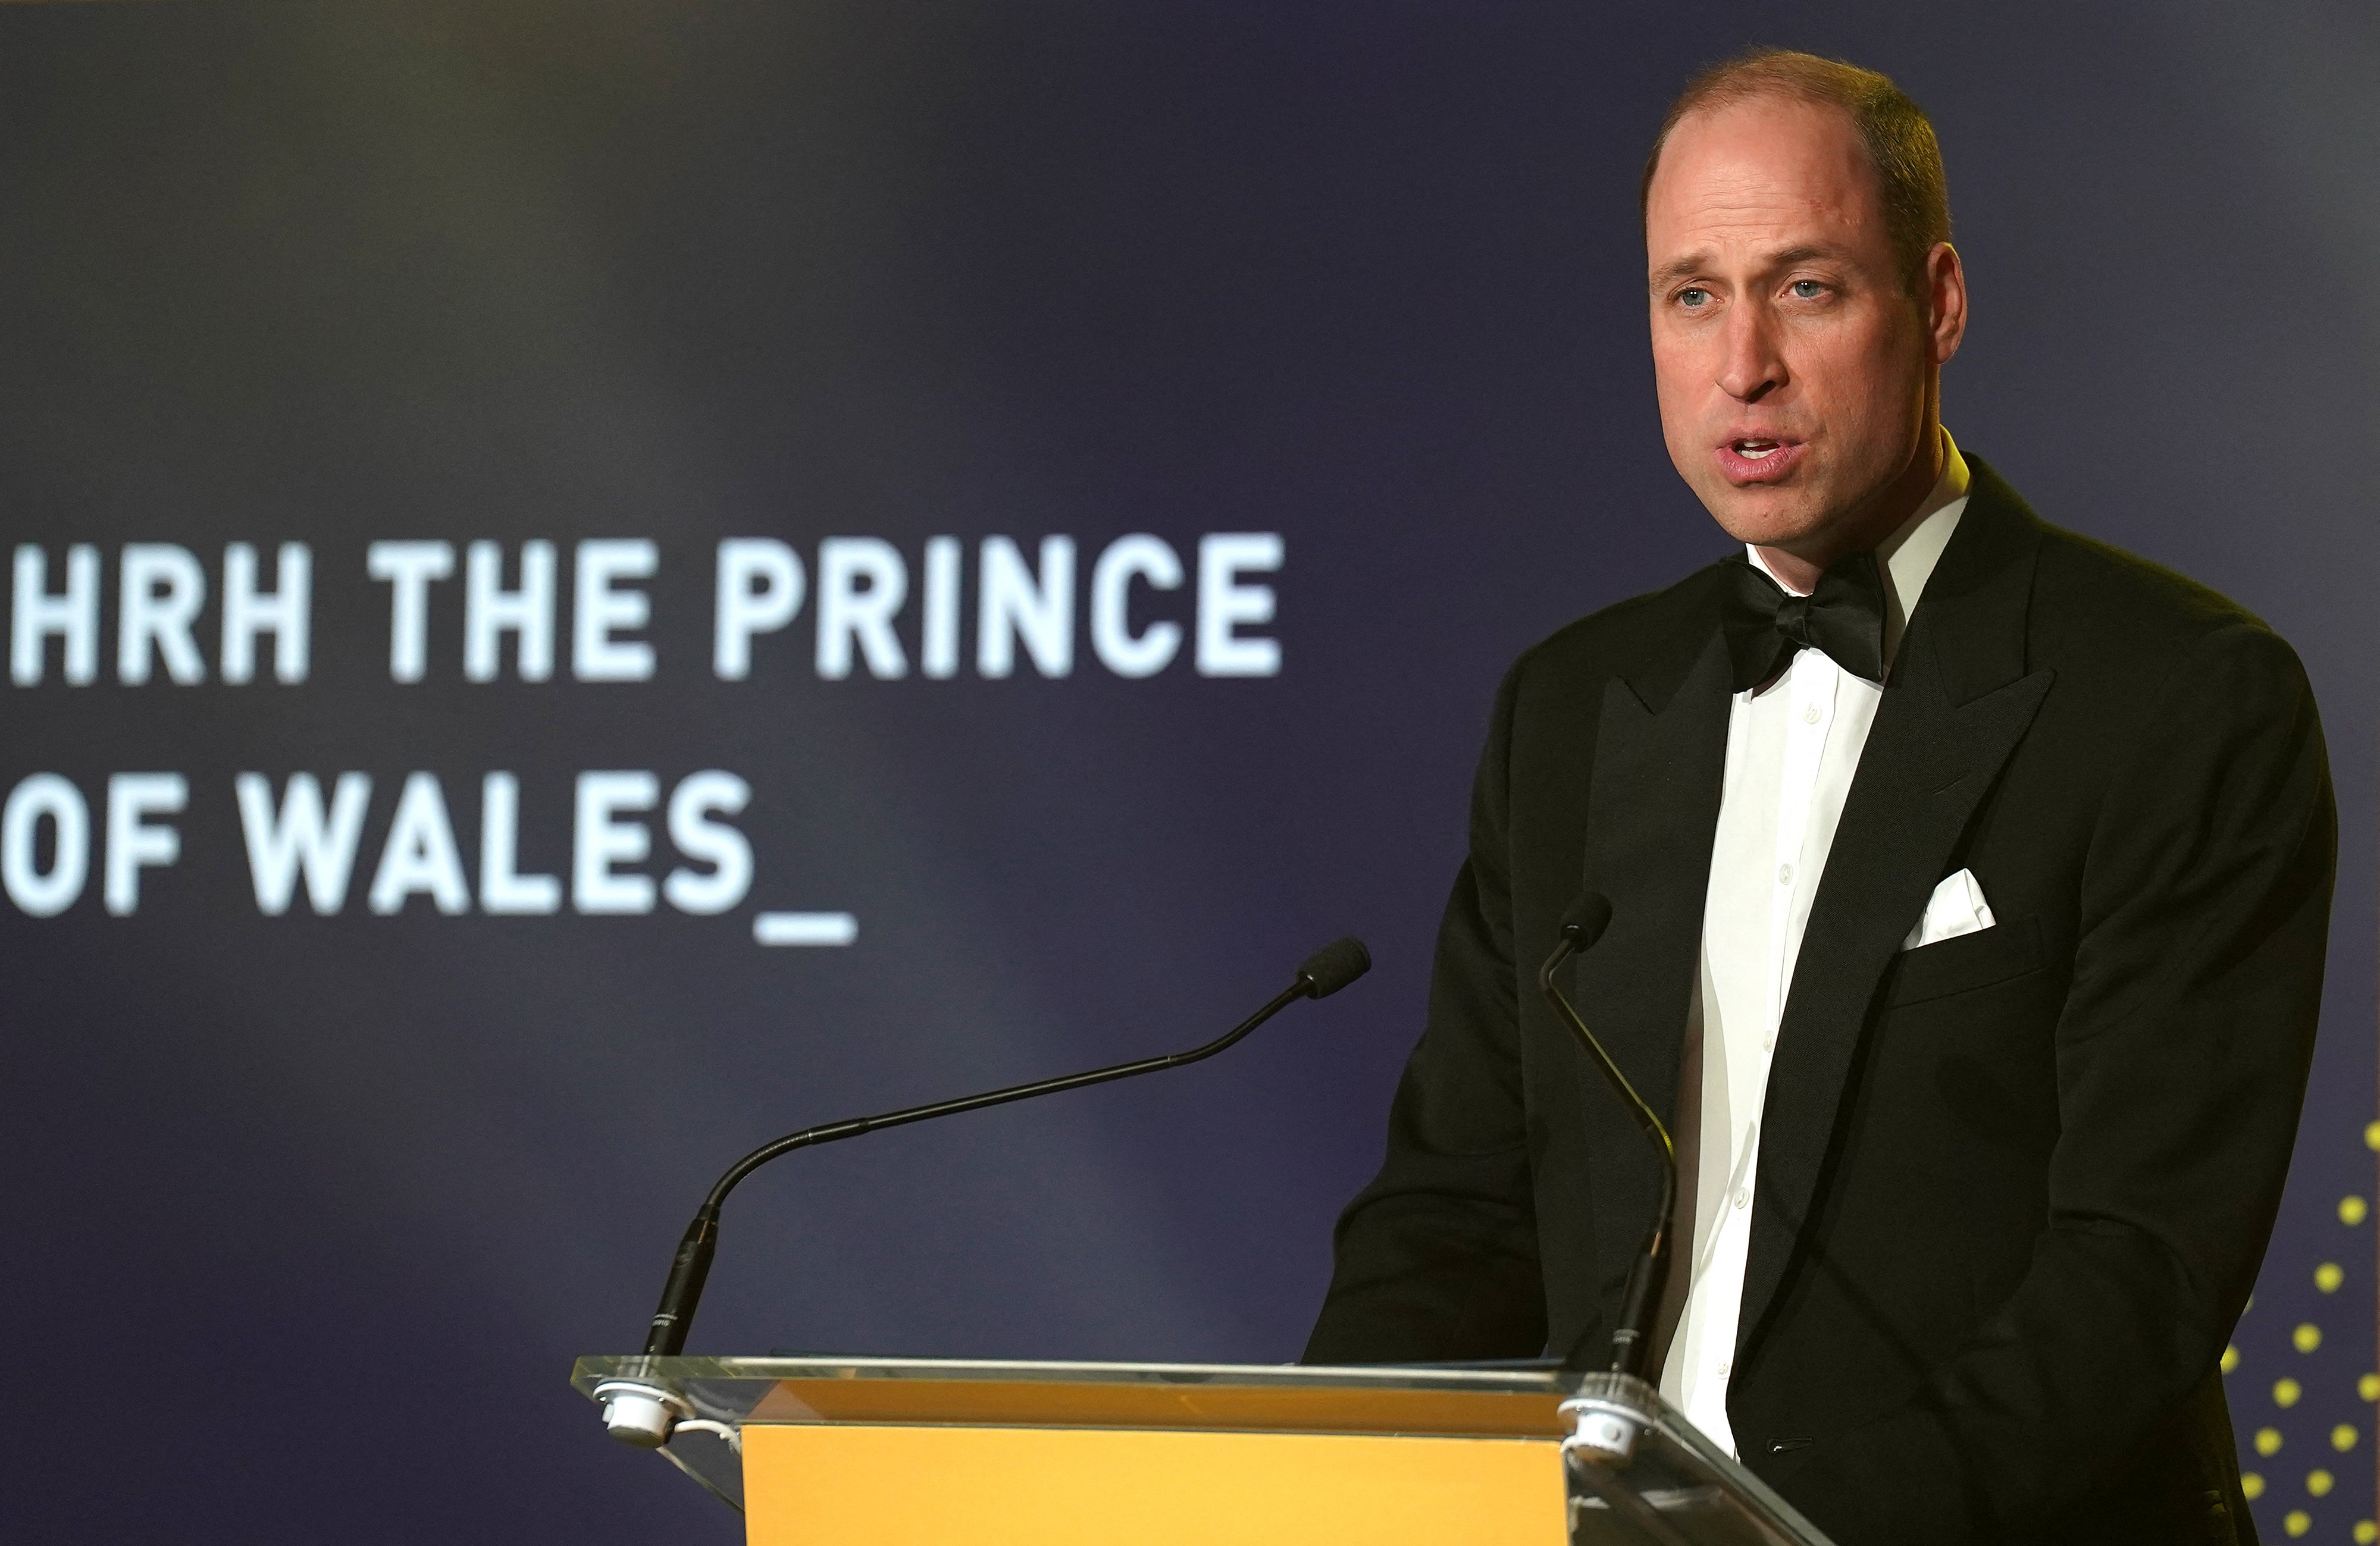 The Prince of Wales handed out prizes marking 25 years of the Diana Legacy Award